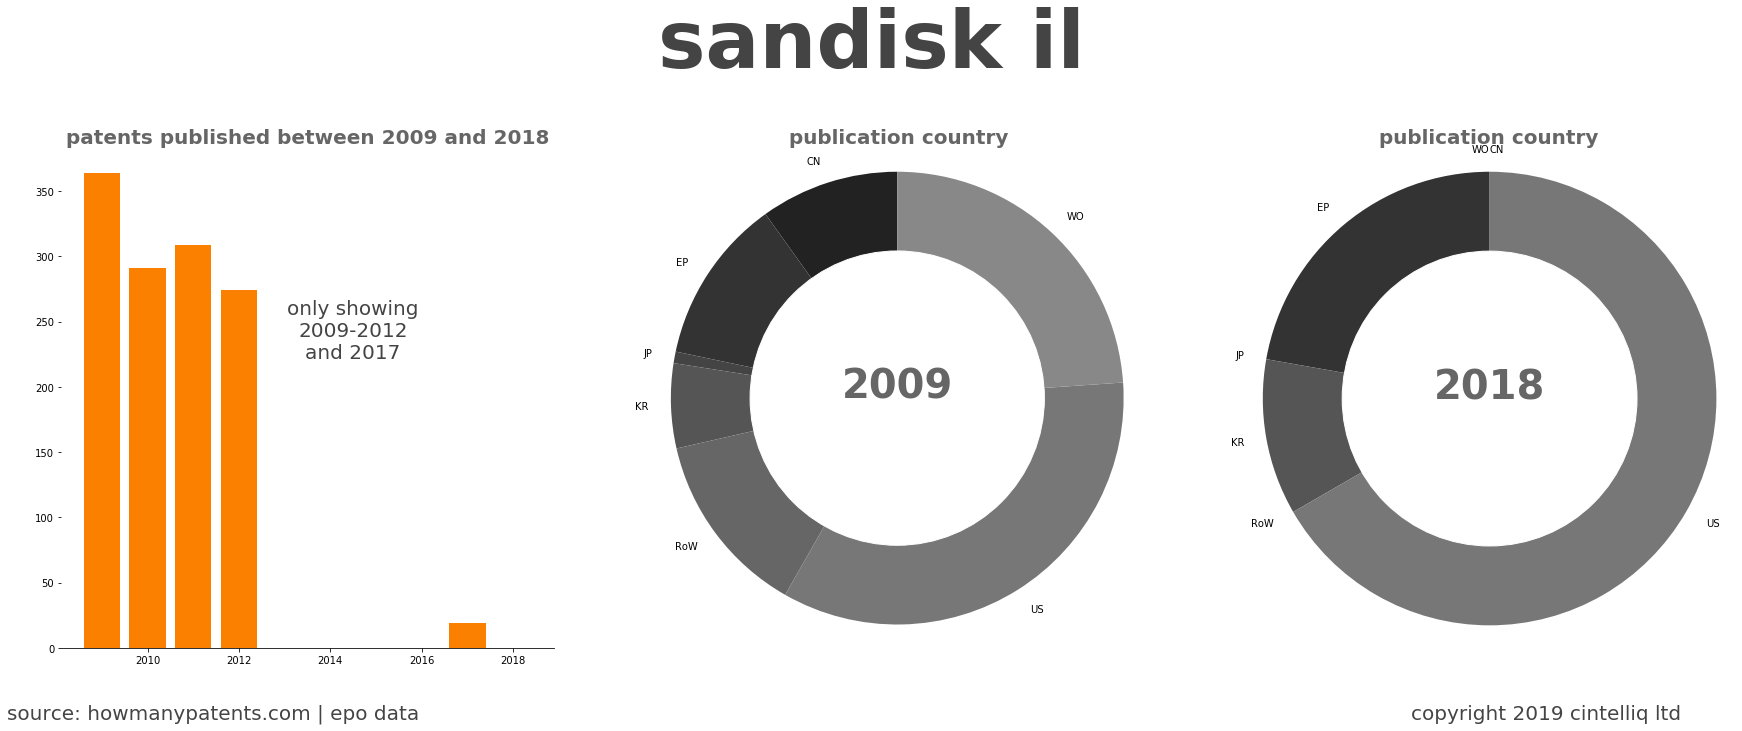 summary of patents for Sandisk Il